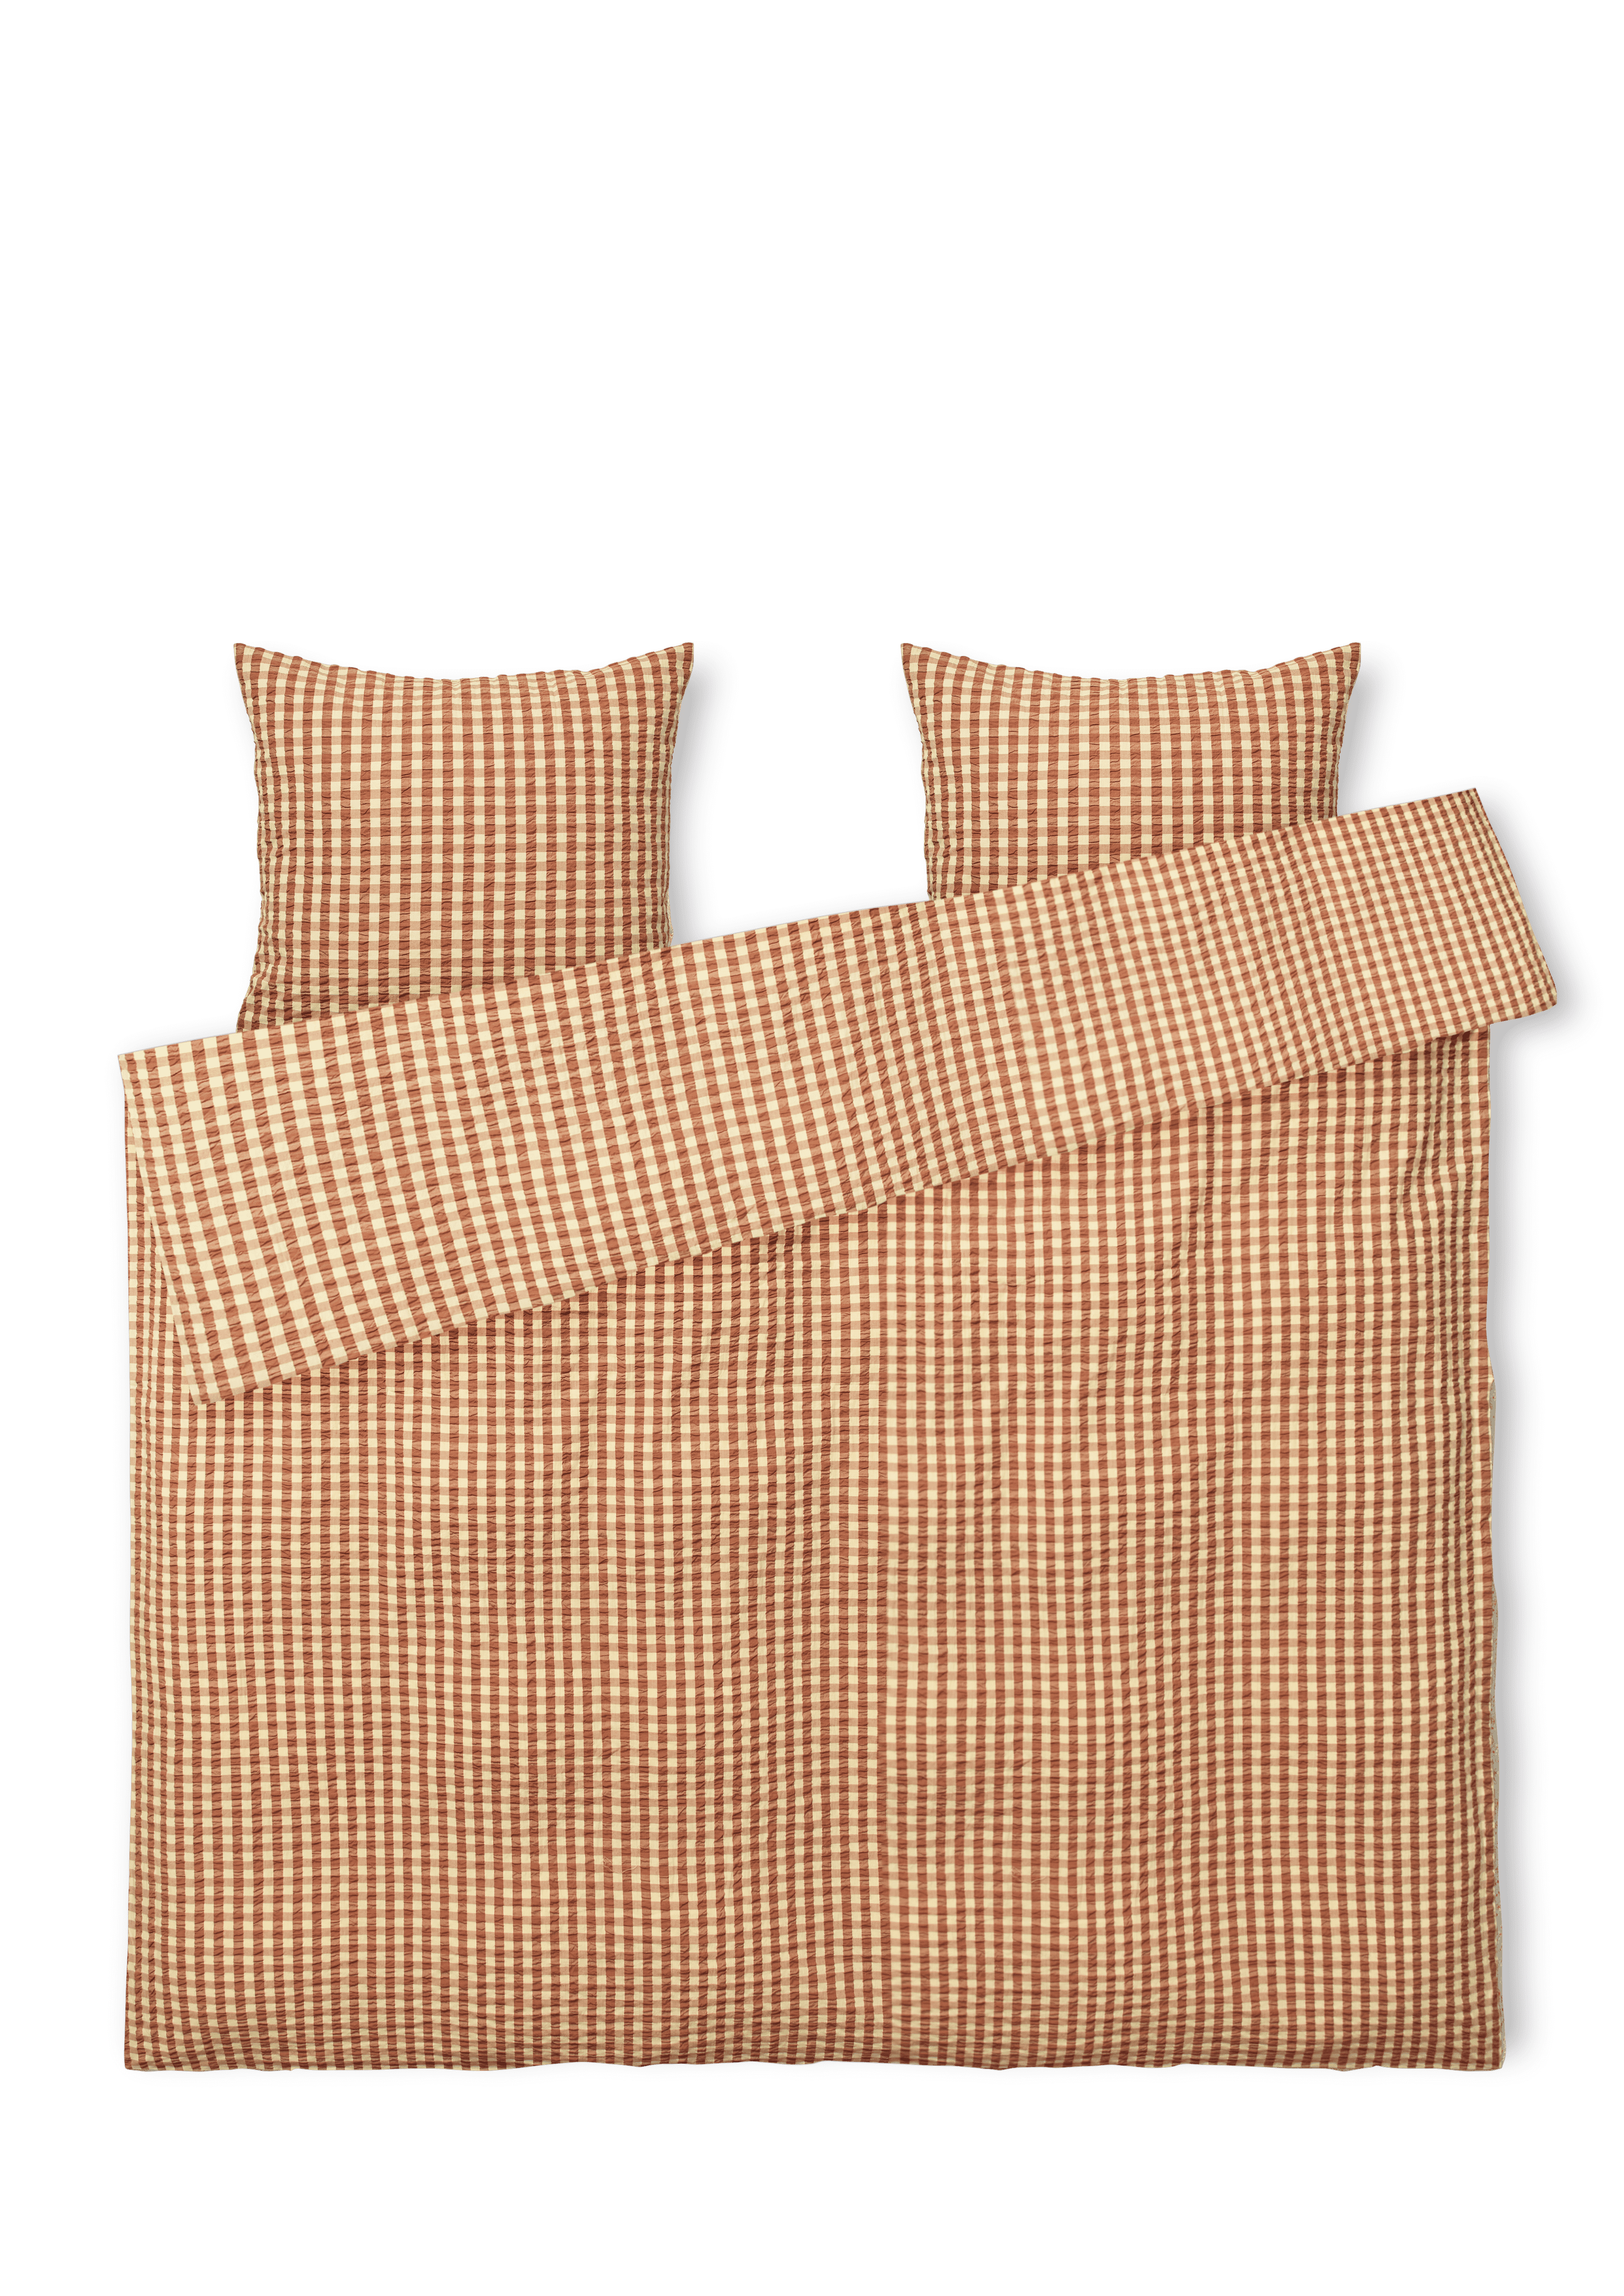 JUNA bedding, throws and - JUNA's official